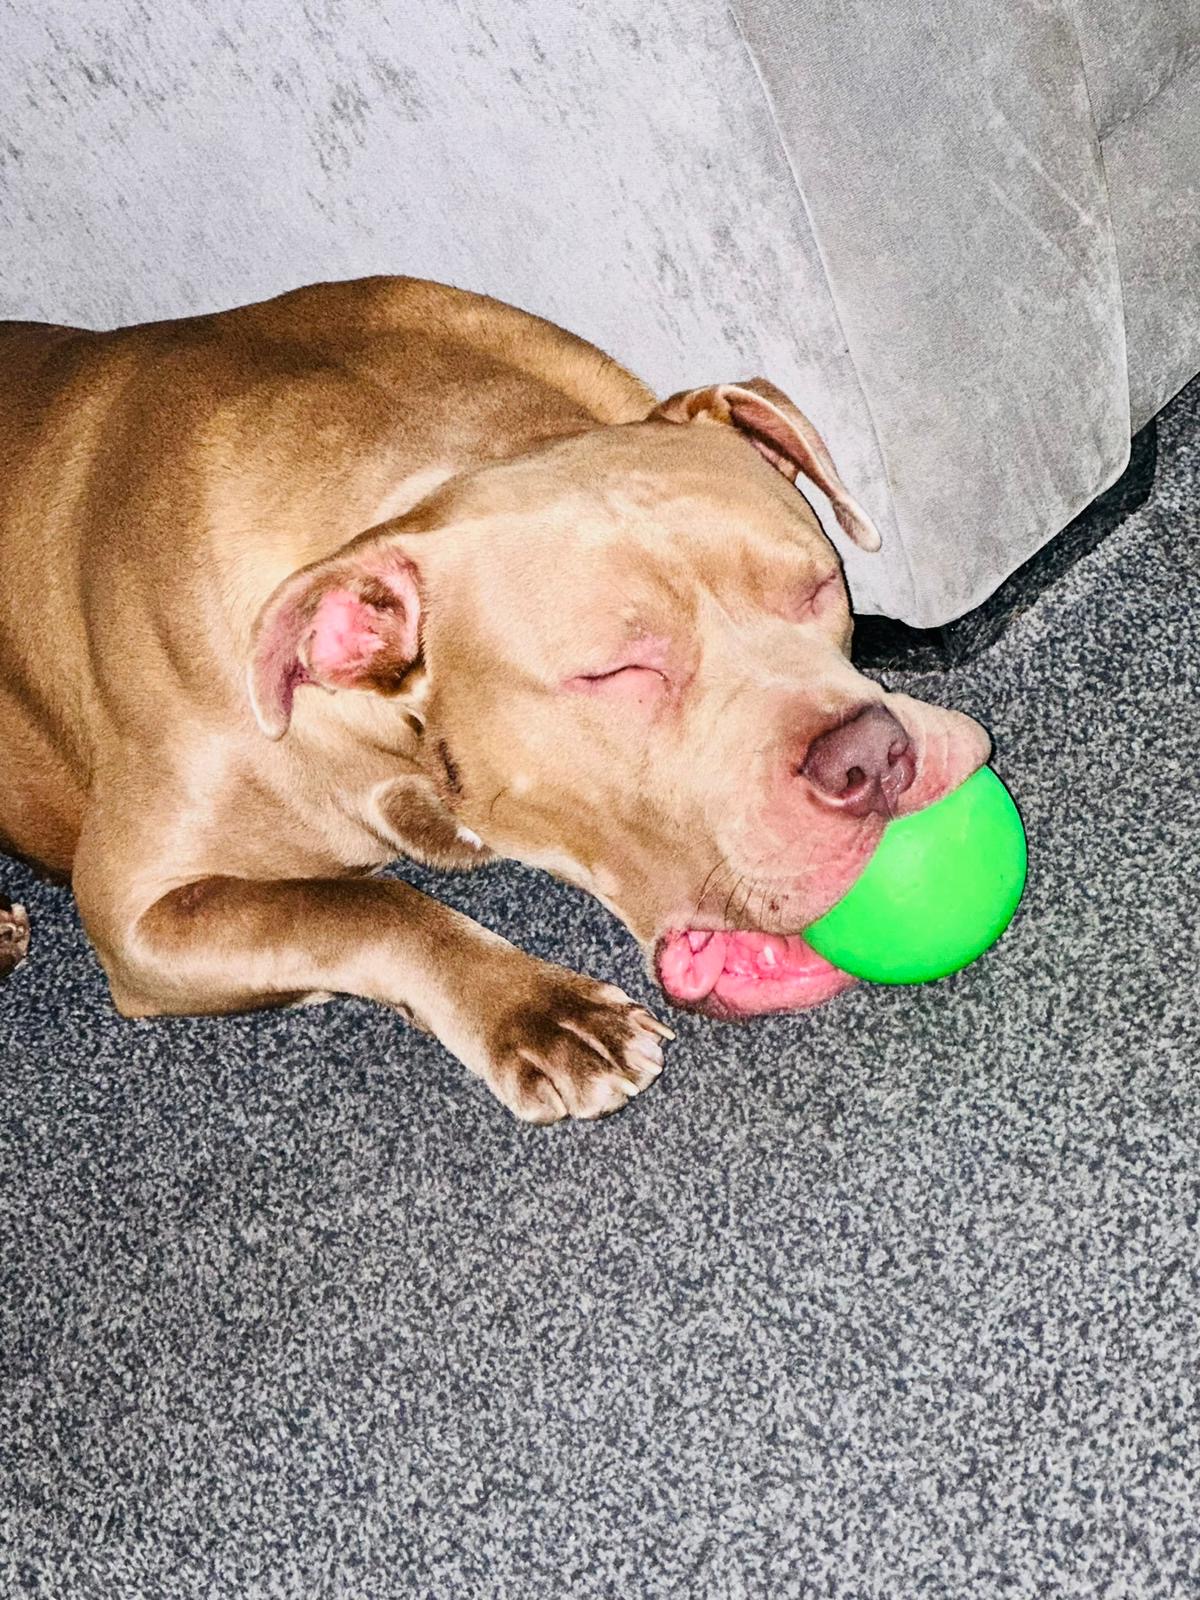 An XL bully dog asleep with a green ball in its mouth